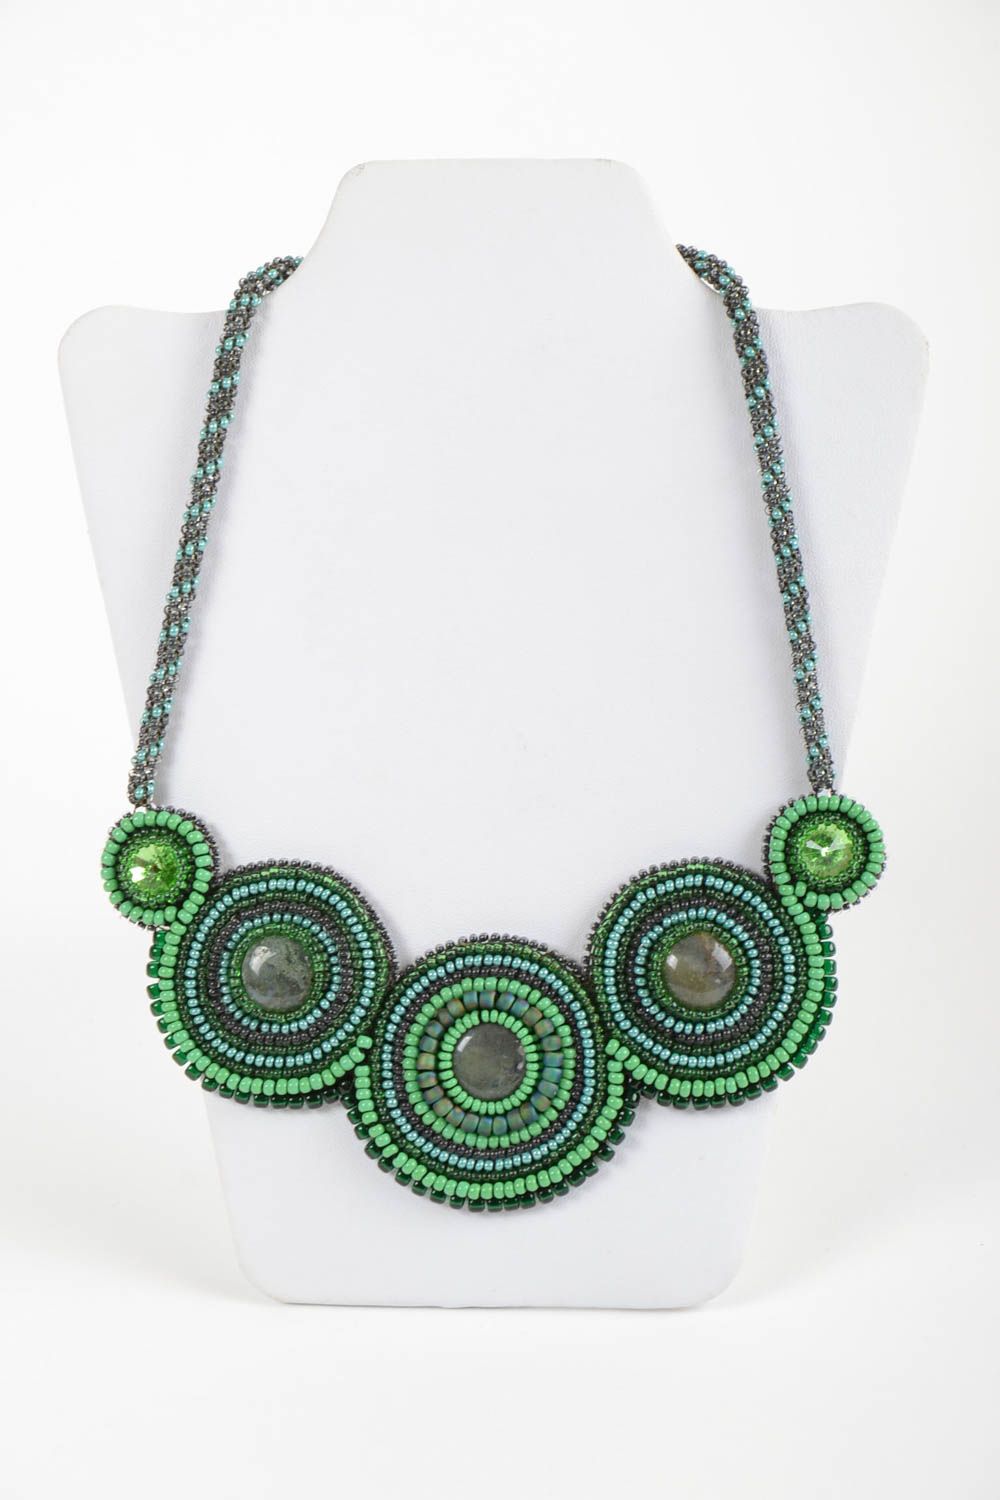 Beaded handmade necklace stylish necklace in green shades unusual jewelry photo 2